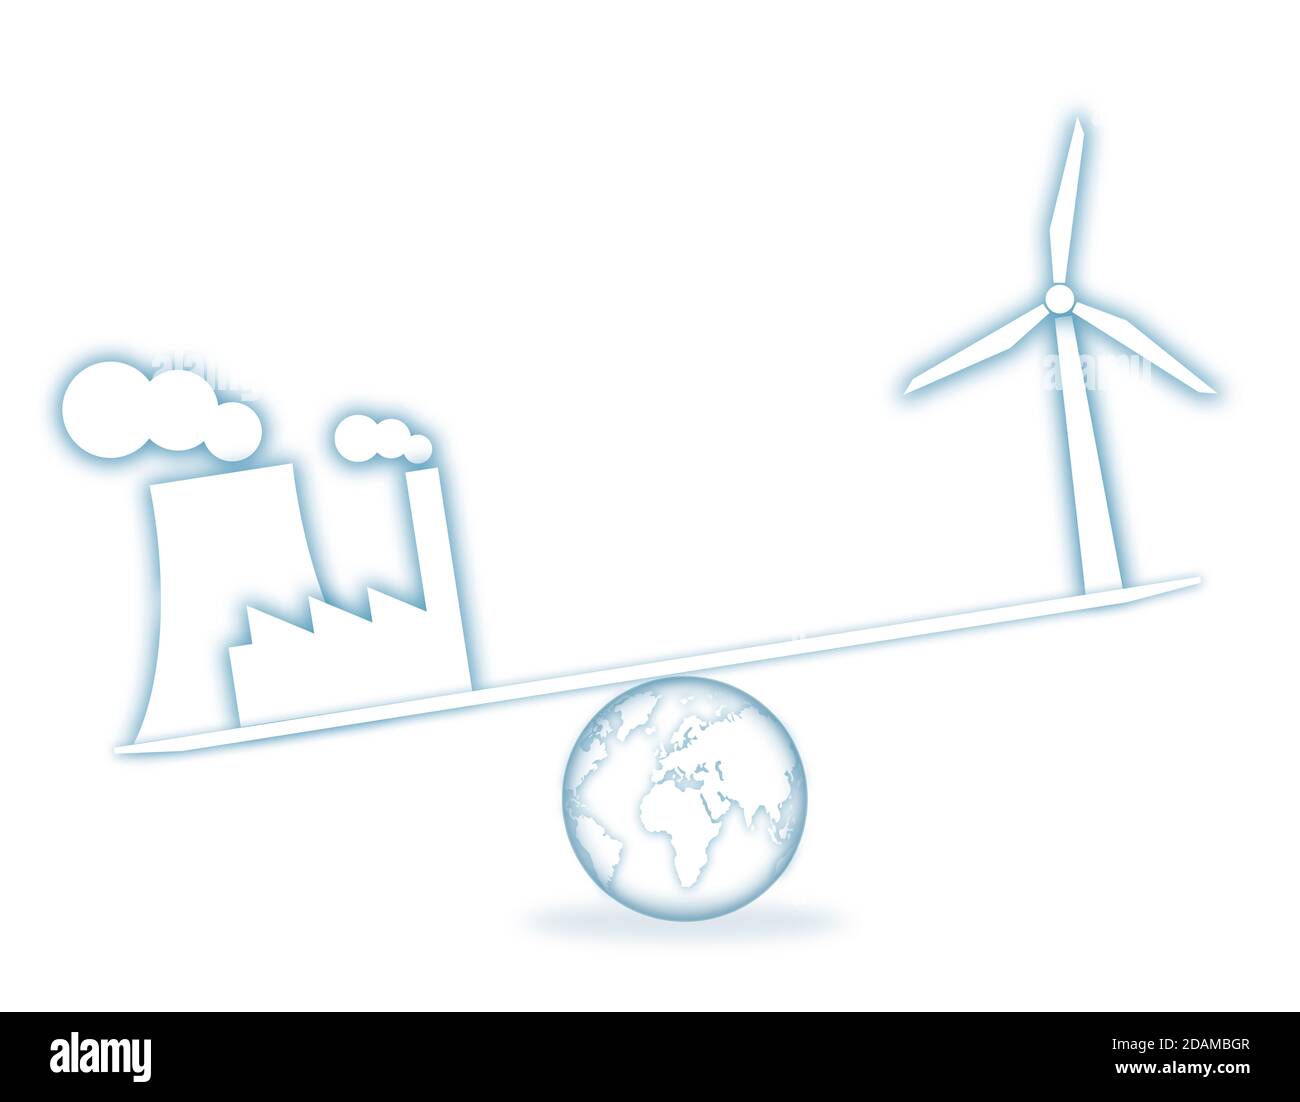 Scales with industry and wind turbine, illustration. Stock Photo